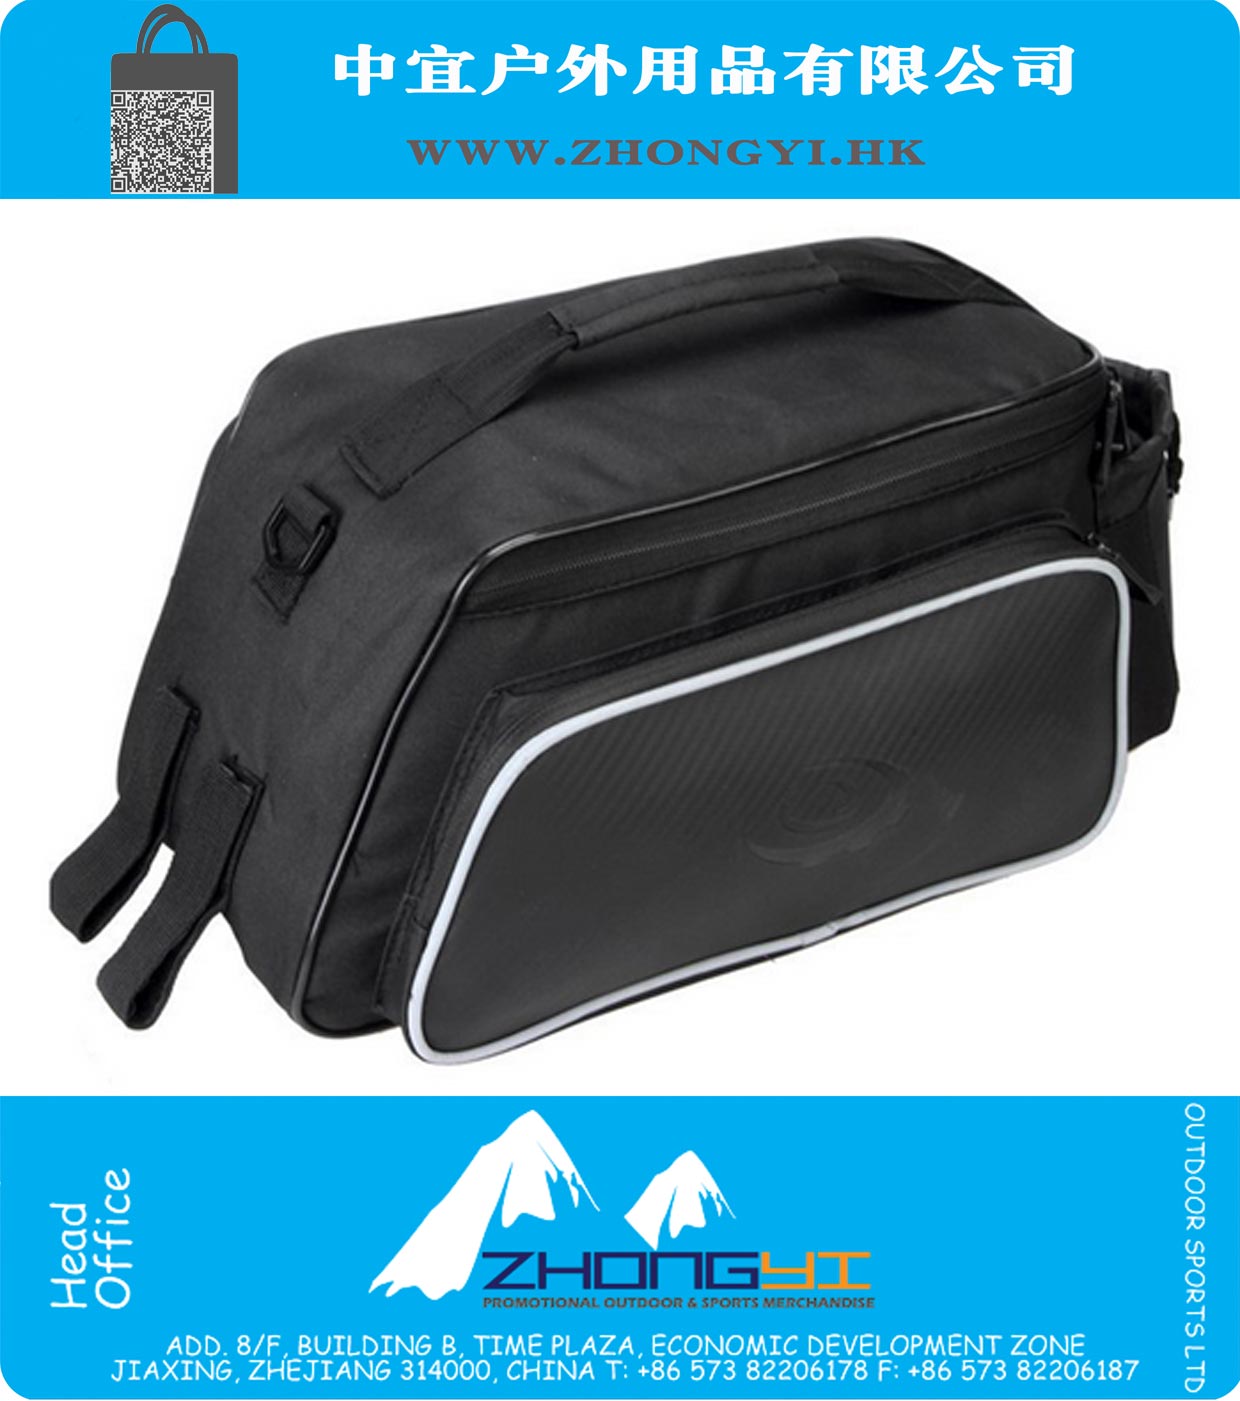 Outdoor Traveling 10L Pouch